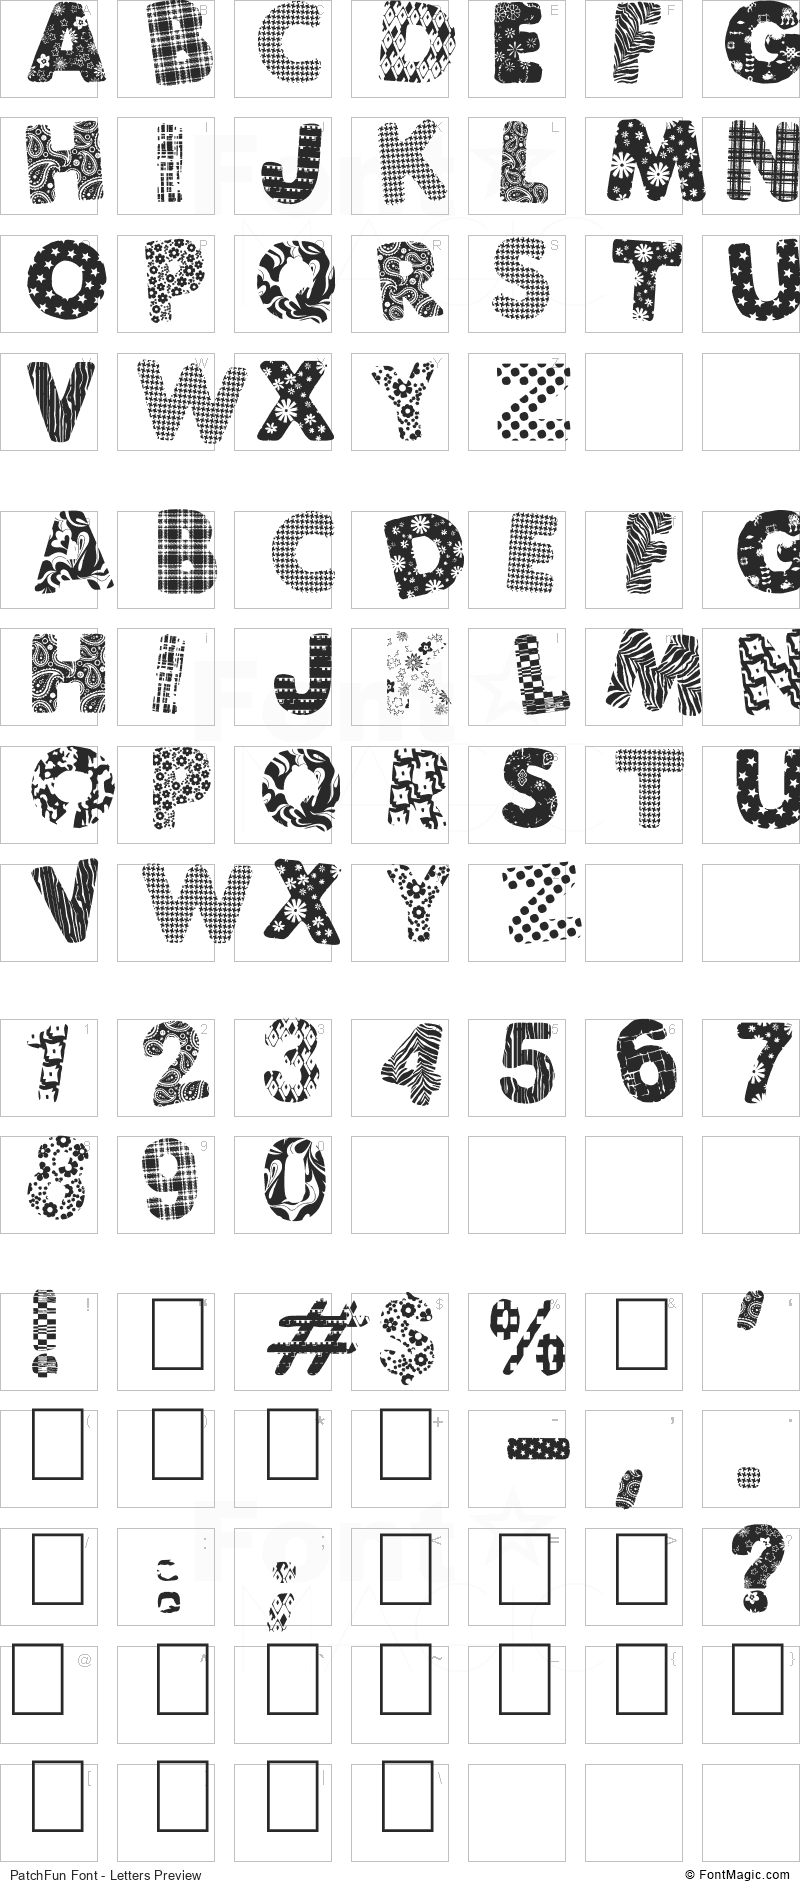 PatchFun Font - All Latters Preview Chart